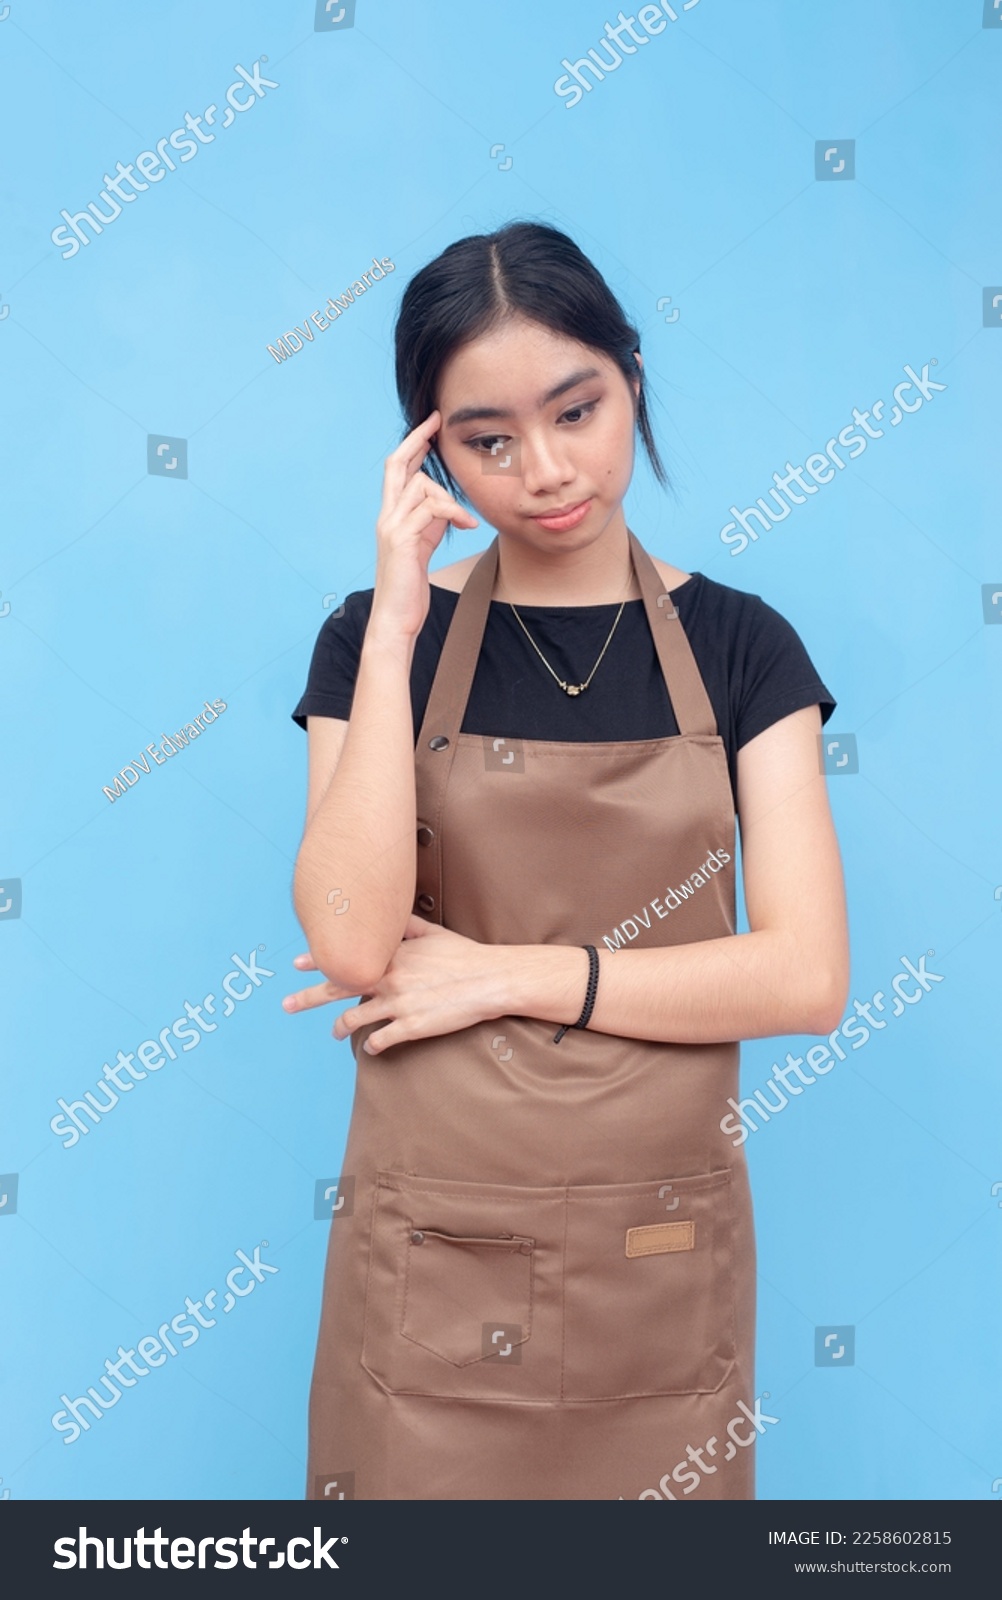 A cute and pretty asian barista or waitress in deep thought, worried about her job. Isolated on a light blue background. #2258602815